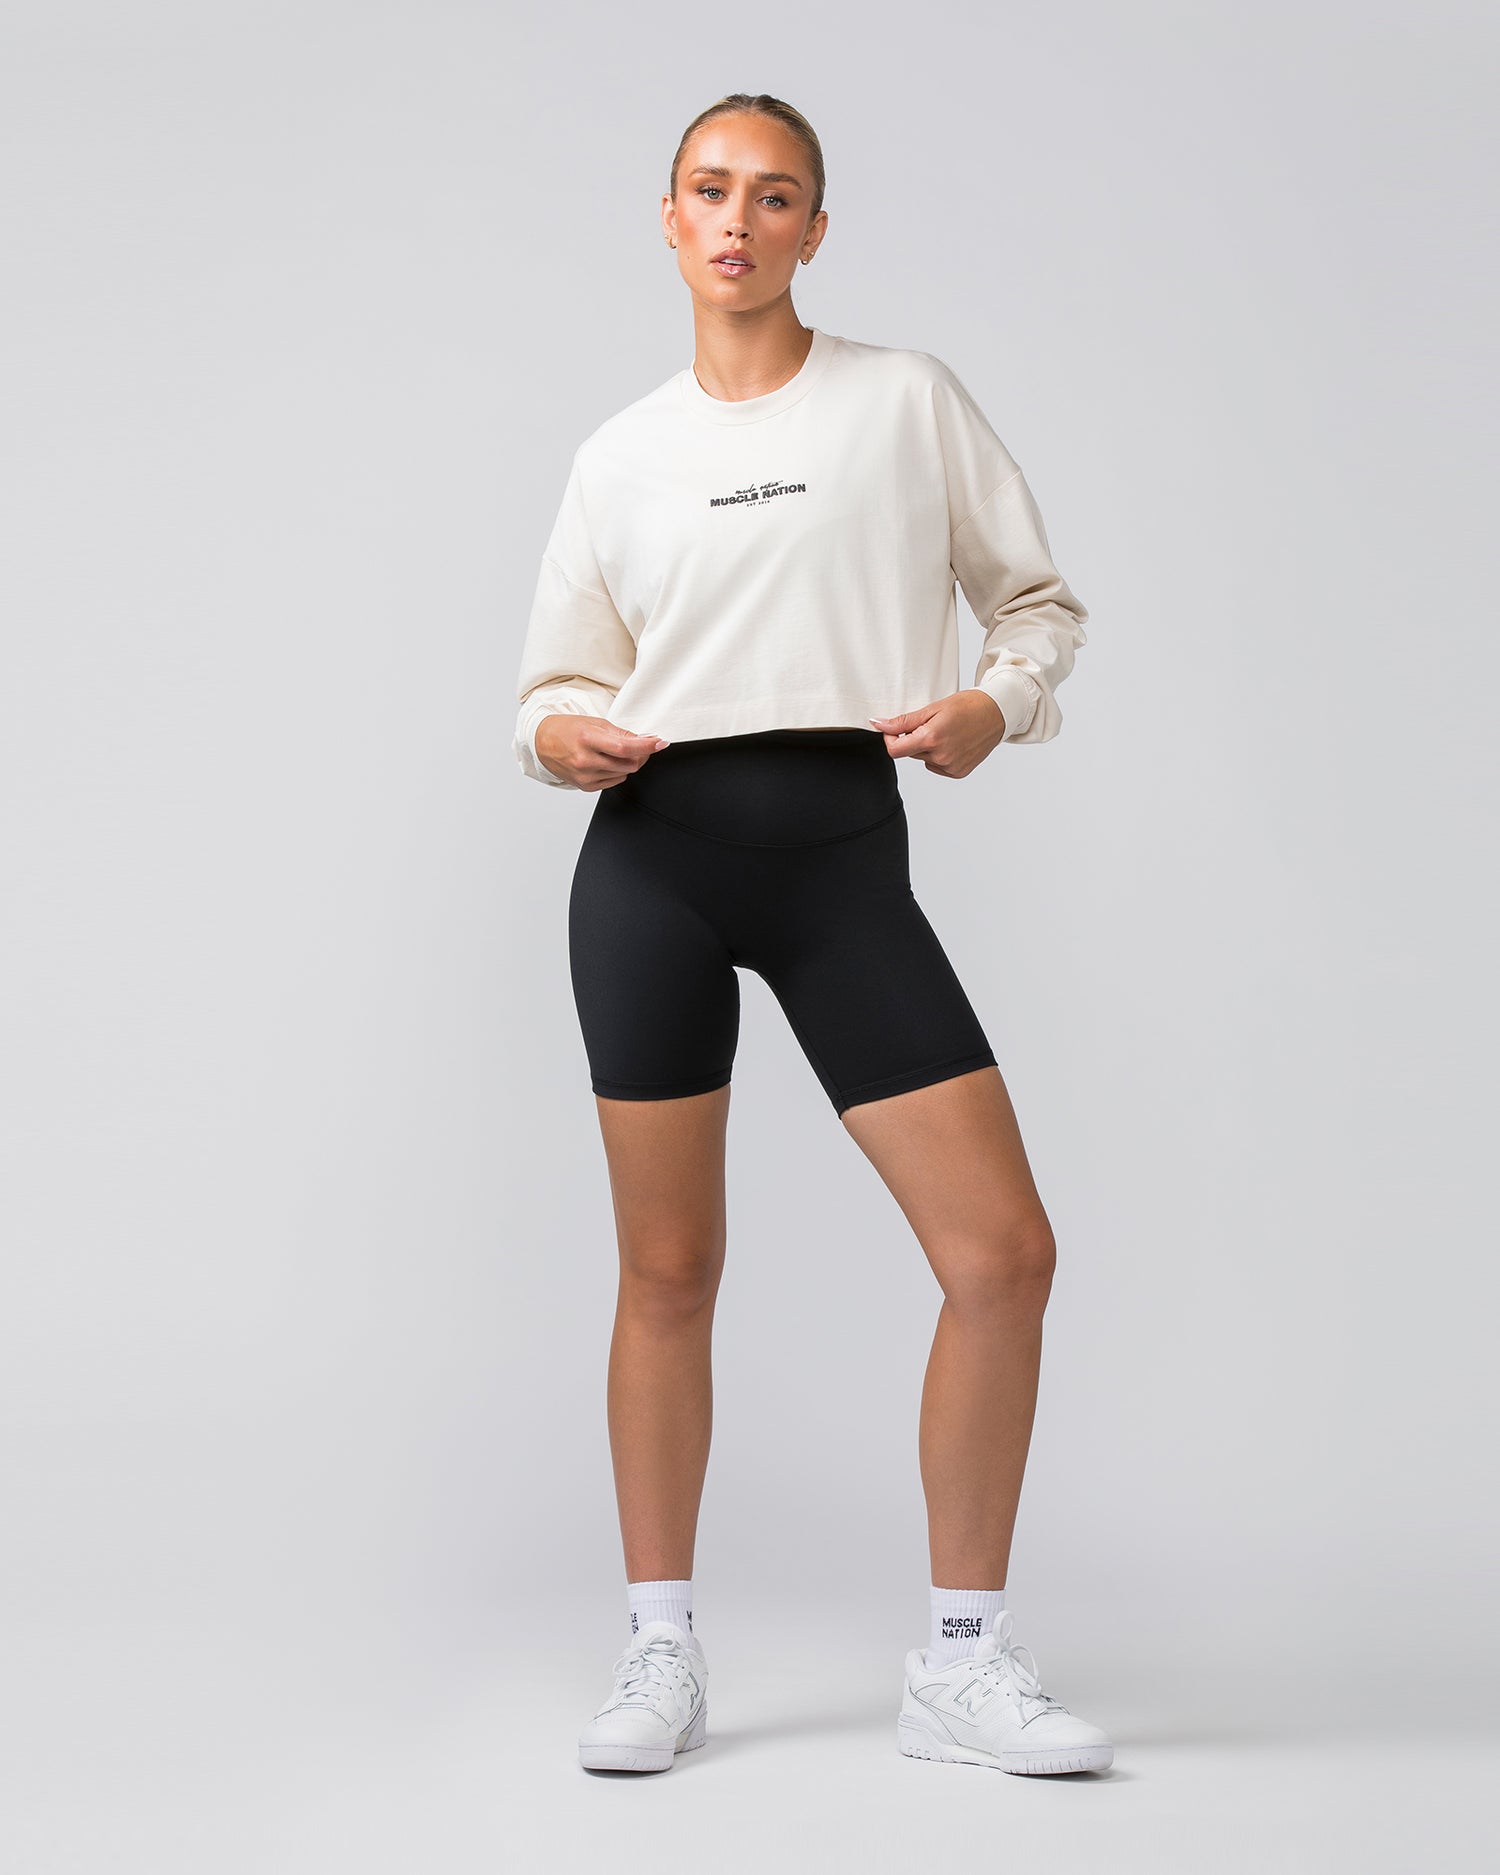 Pace Cropped Long Sleeve Tee - Dew